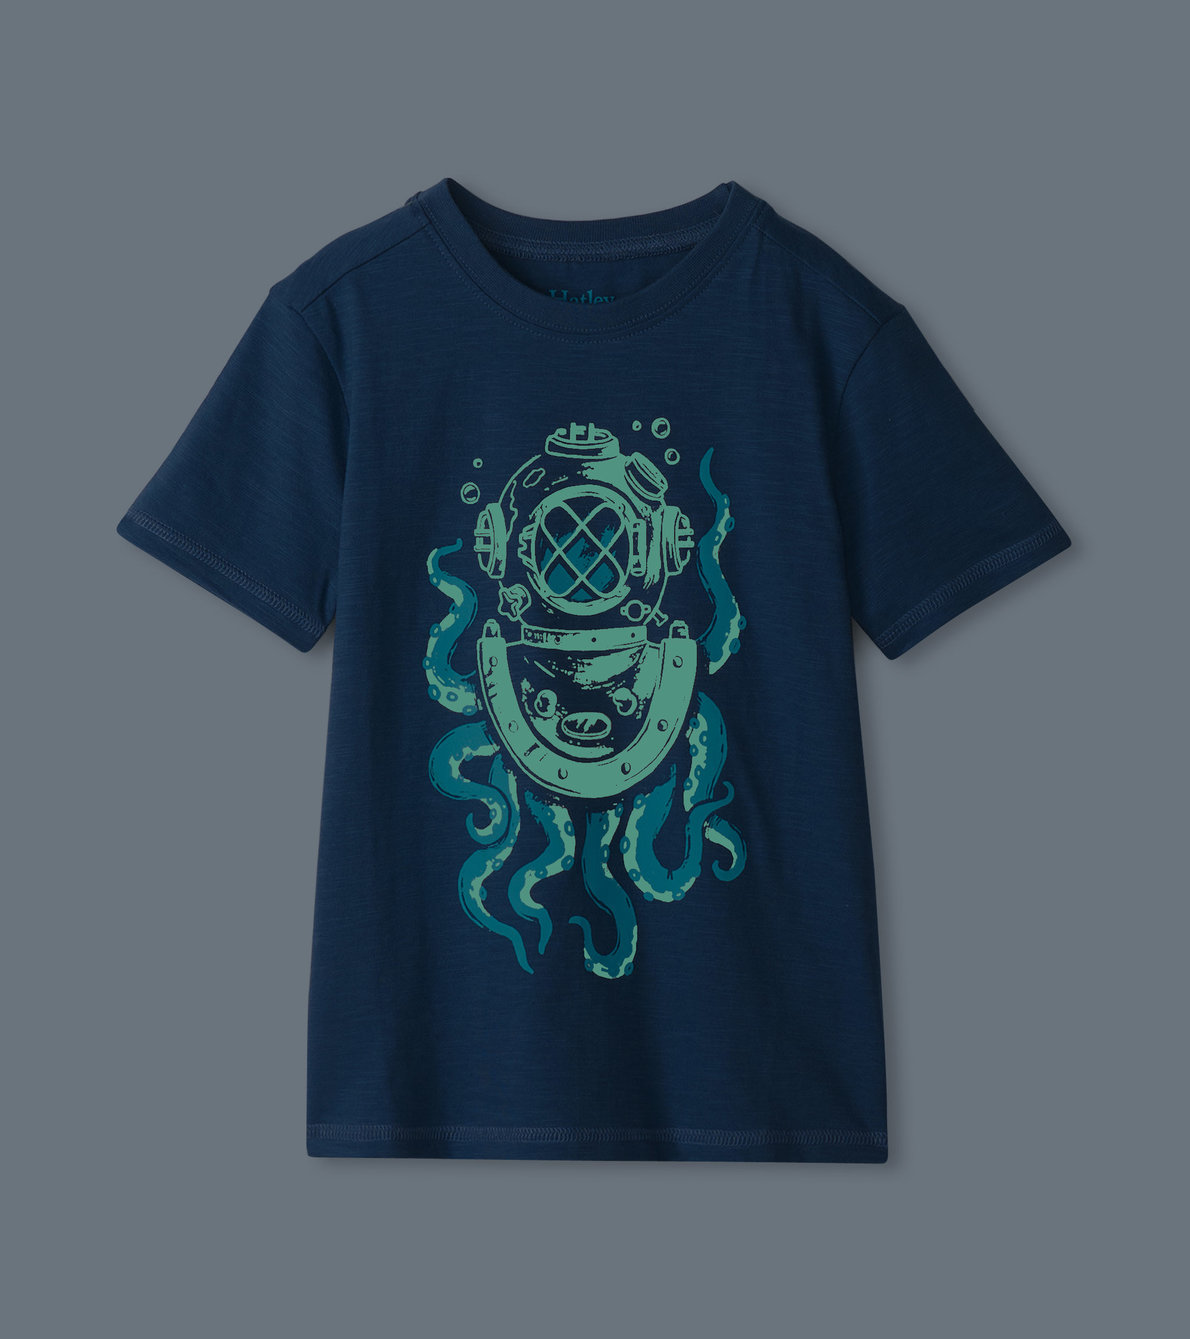 View larger image of Boys Deep Sea Mariner Graphic Tee